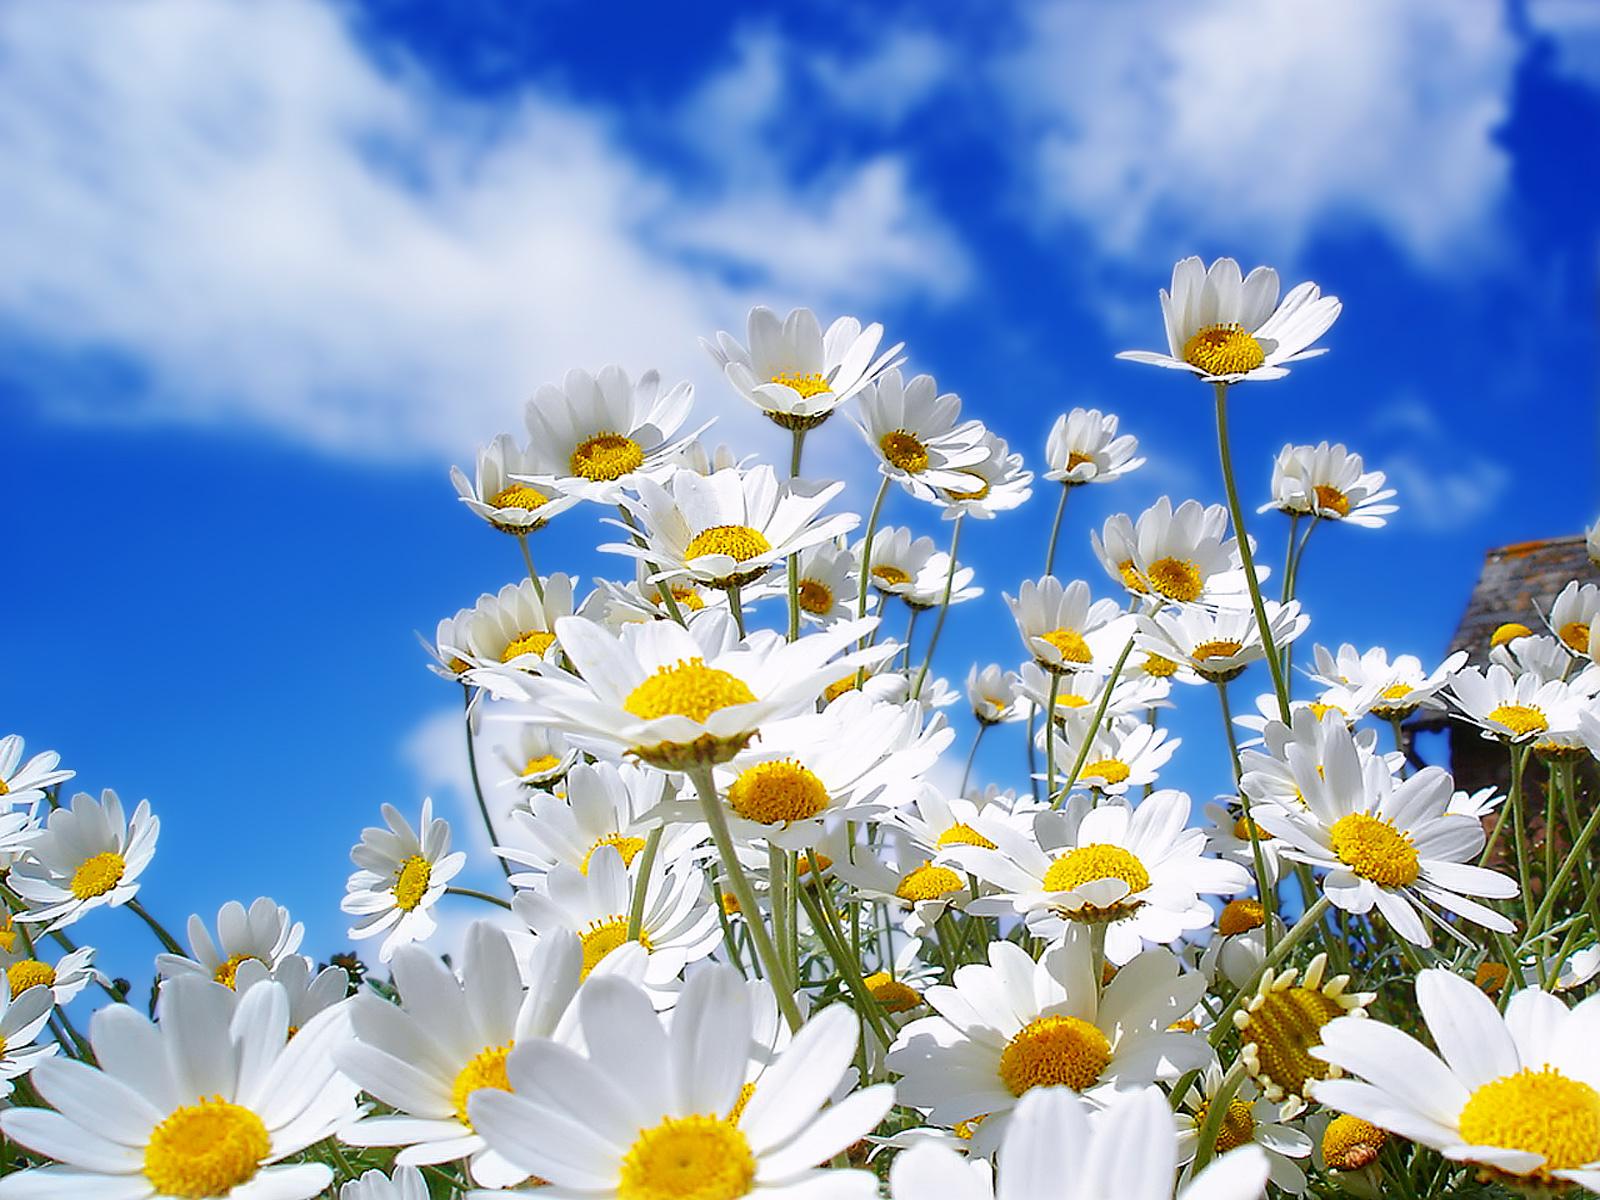 Spring Flowers HD Wallpaper | Nature Wallpapers